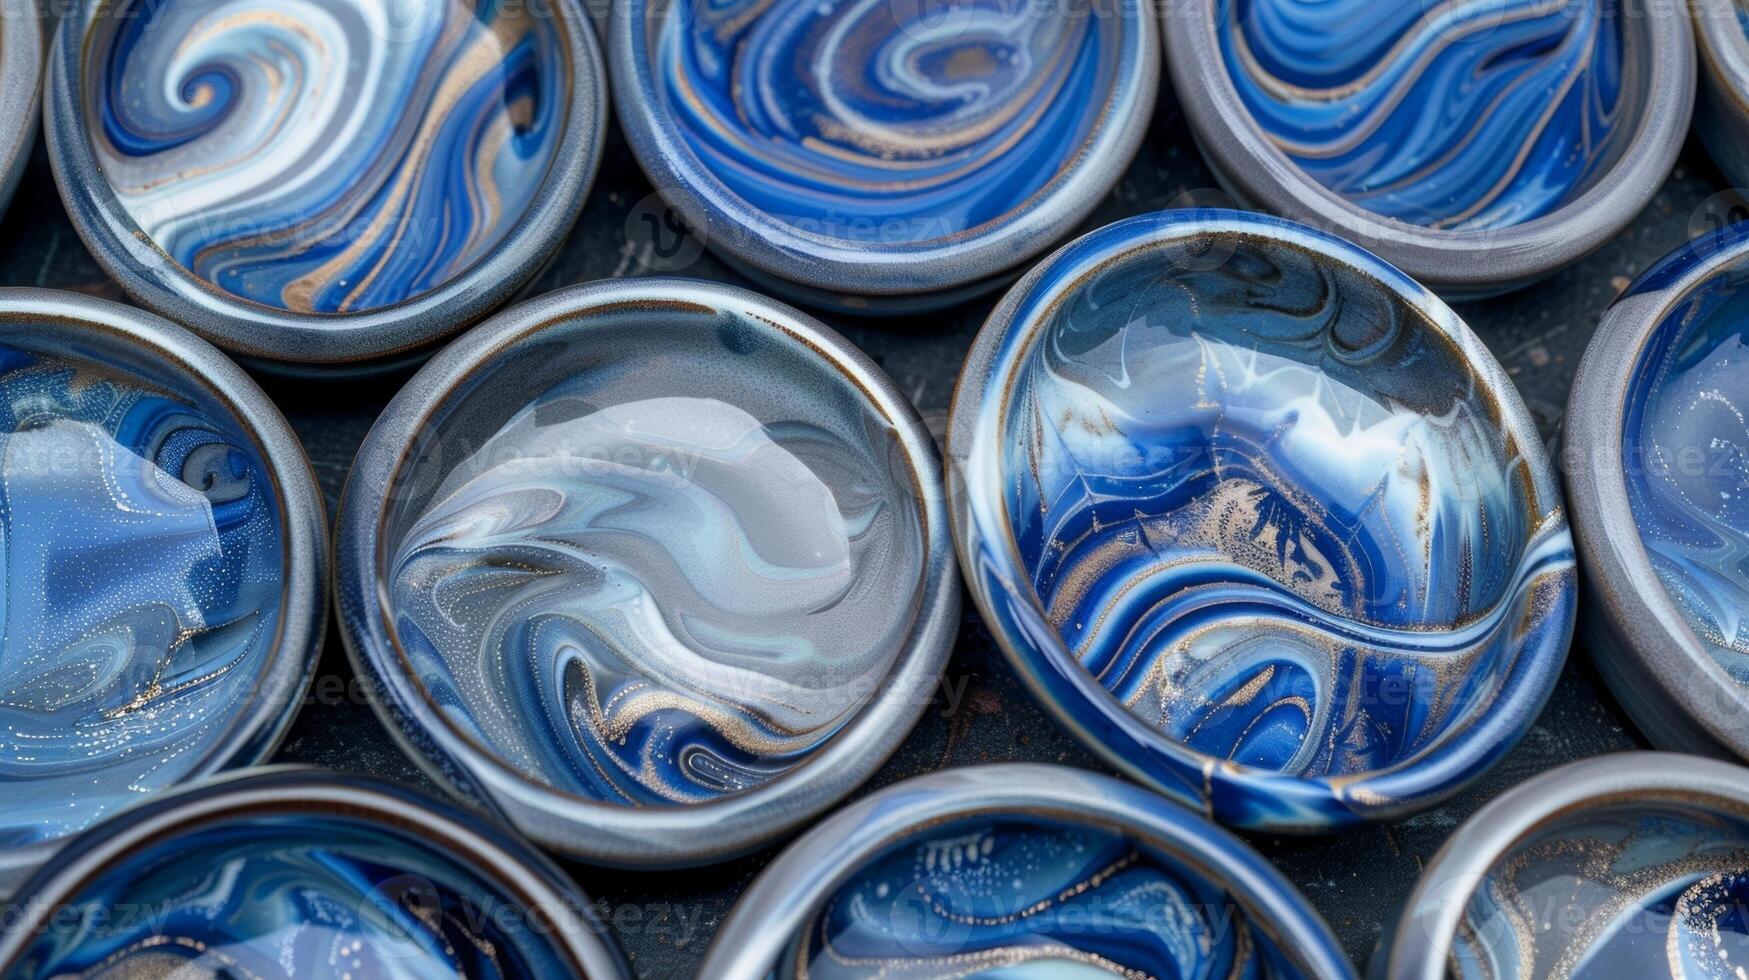 A set of ceramic soap dishes with a unique marbled pattern in shades of blue and grey. photo